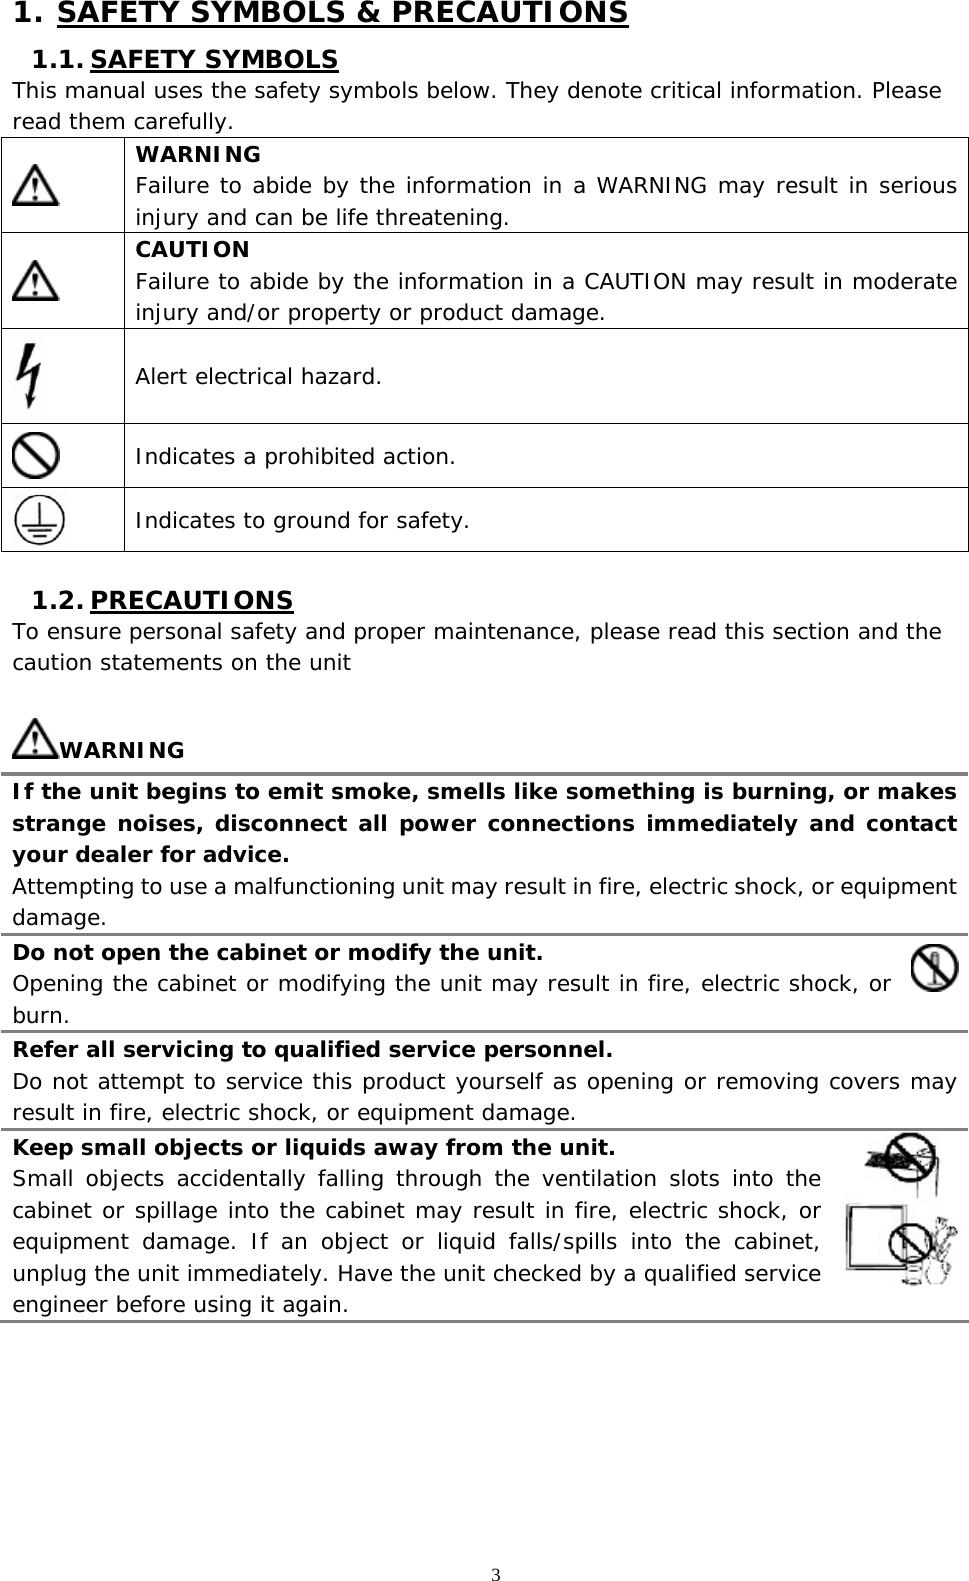   3 1. SAFETY SYMBOLS &amp; PRECAUTIONS 1.1. SAFETY SYMBOLS This manual uses the safety symbols below. They denote critical information. Please read them carefully.  WARNING Failure to abide by the information in a WARNING may result in serious injury and can be life threatening.  CAUTION Failure to abide by the information in a CAUTION may result in moderate injury and/or property or product damage.  Alert electrical hazard.  Indicates a prohibited action.  Indicates to ground for safety.  1.2. PRECAUTIONS To ensure personal safety and proper maintenance, please read this section and the caution statements on the unit  WARNING If the unit begins to emit smoke, smells like something is burning, or makes strange noises, disconnect all power connections immediately and contact your dealer for advice. Attempting to use a malfunctioning unit may result in fire, electric shock, or equipment damage. Do not open the cabinet or modify the unit. Opening the cabinet or modifying the unit may result in fire, electric shock, or burn. Refer all servicing to qualified service personnel. Do not attempt to service this product yourself as opening or removing covers may result in fire, electric shock, or equipment damage. Keep small objects or liquids away from the unit. Small objects accidentally falling through the ventilation slots into the cabinet or spillage into the cabinet may result in fire, electric shock, or equipment damage. If an object or liquid falls/spills into the cabinet, unplug the unit immediately. Have the unit checked by a qualified service engineer before using it again. 